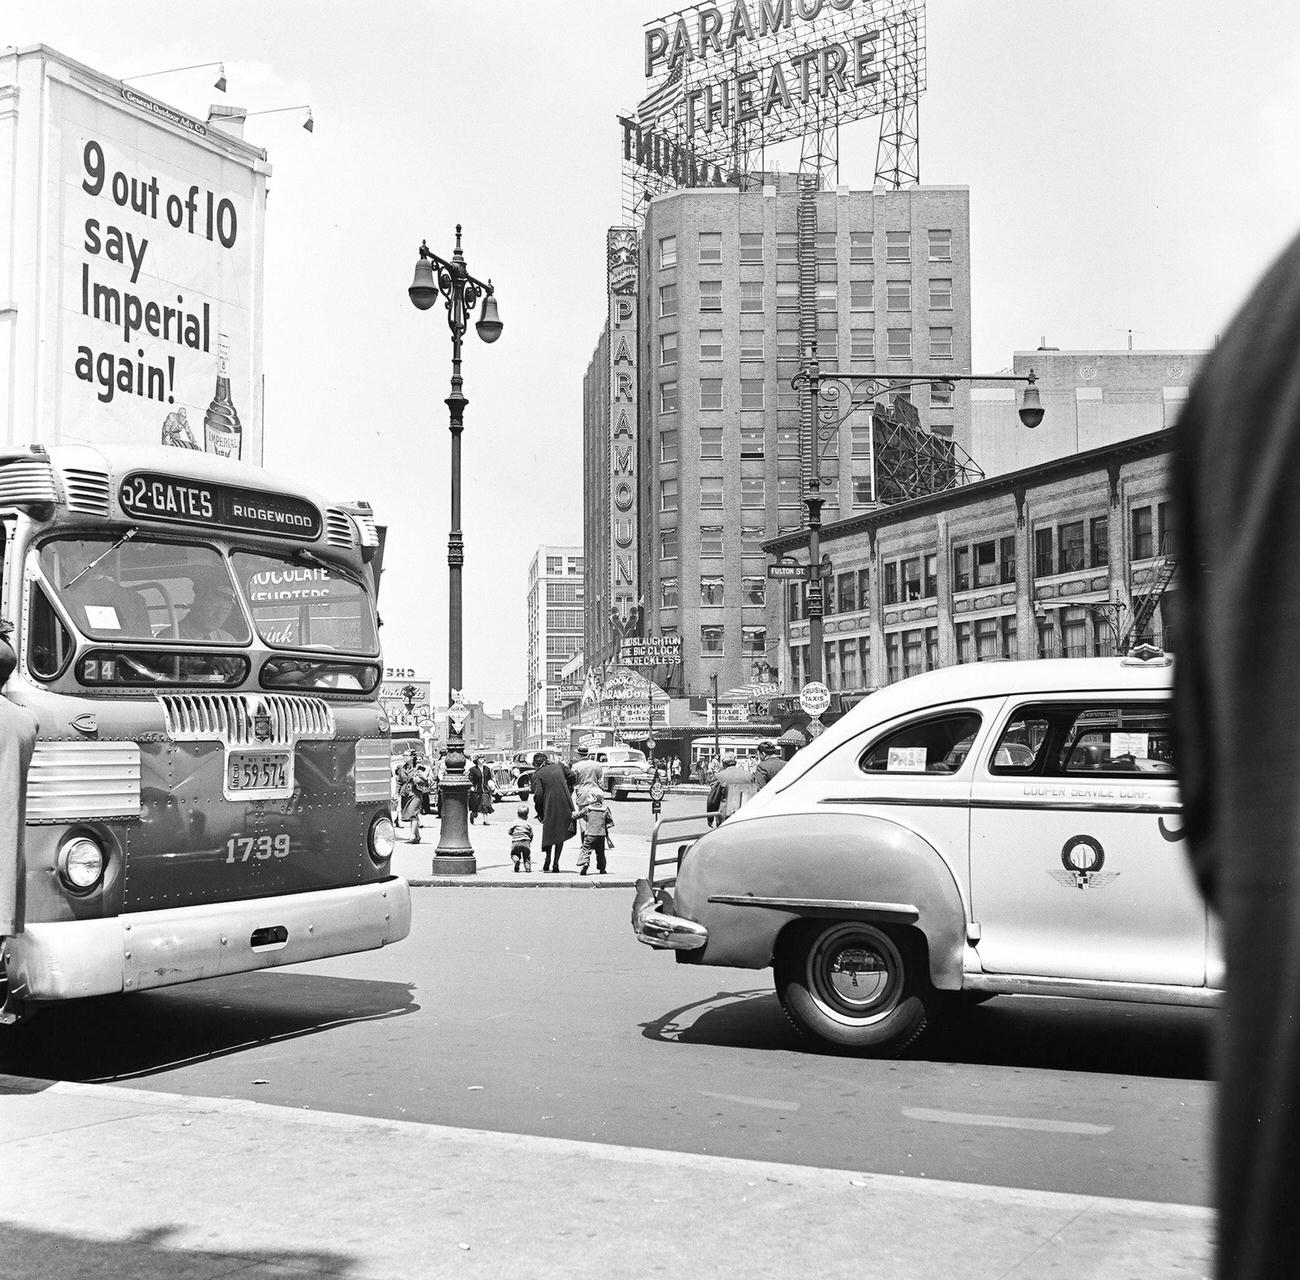 Views, Looking North Across The Intersection Of Fulton Street And Flatbush Avenue, Towards The Paramount Theatre, Brooklyn, 1948